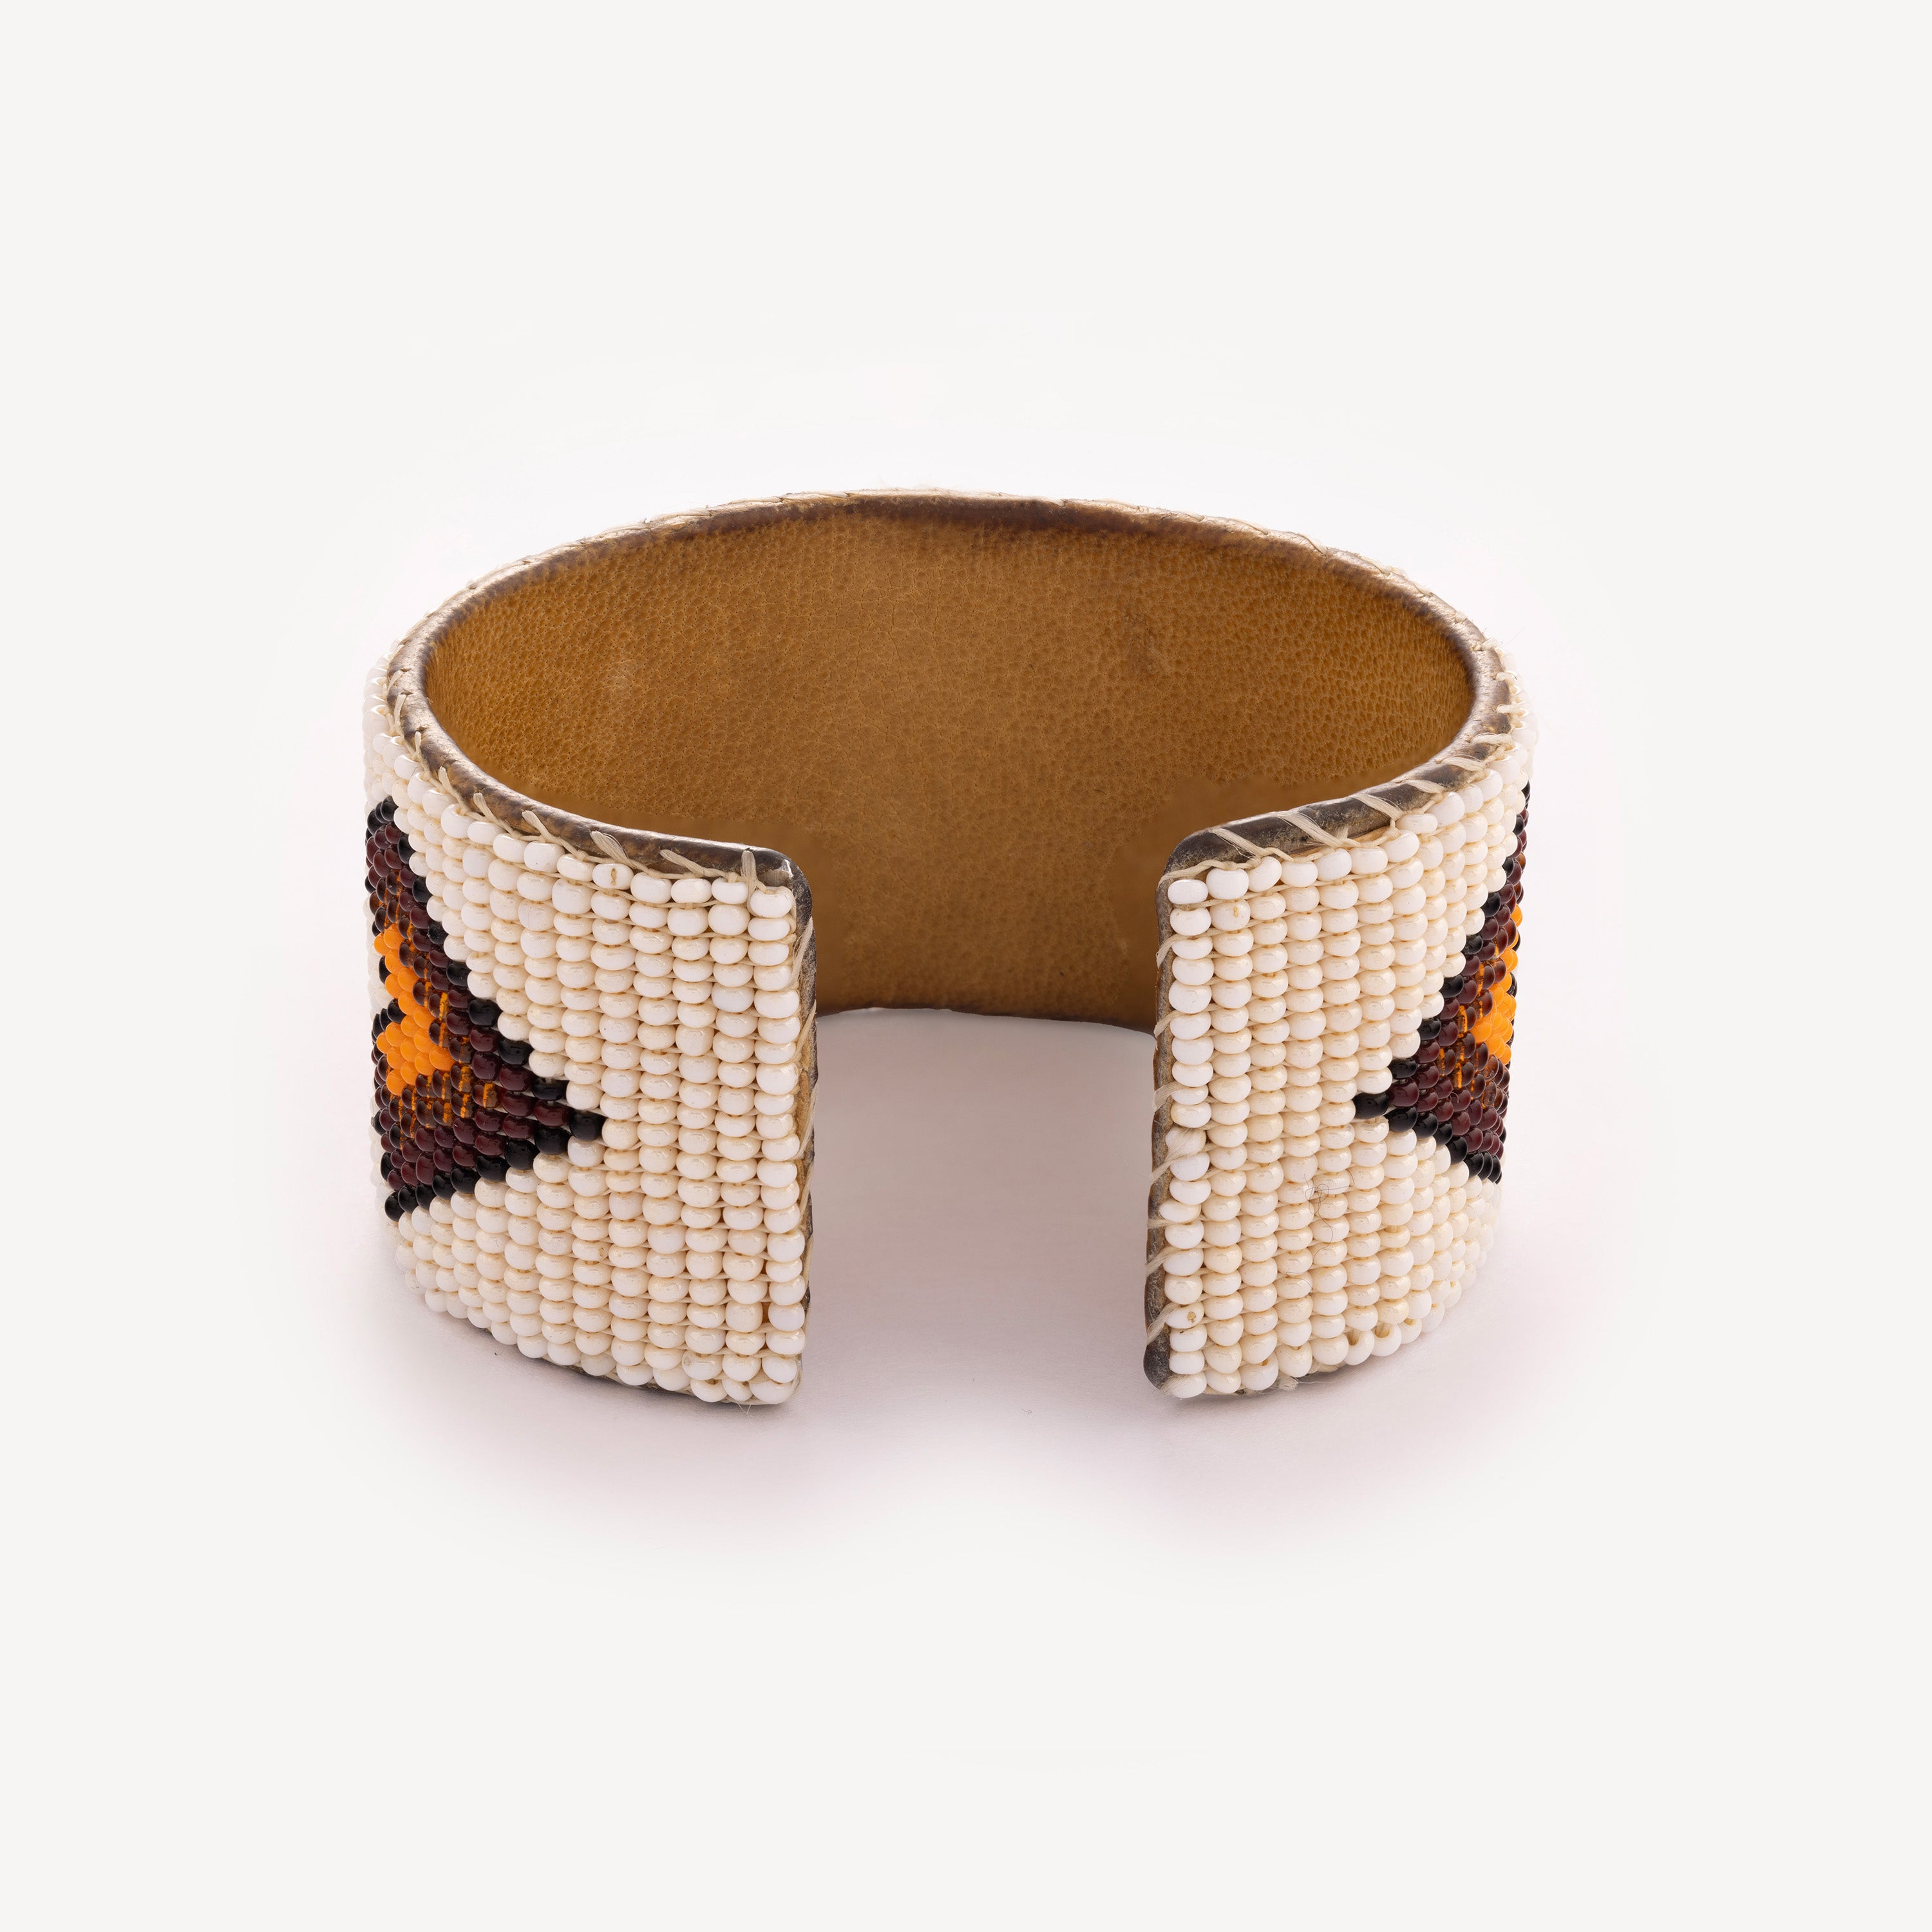 Sioux Leather and Bead Bracelet